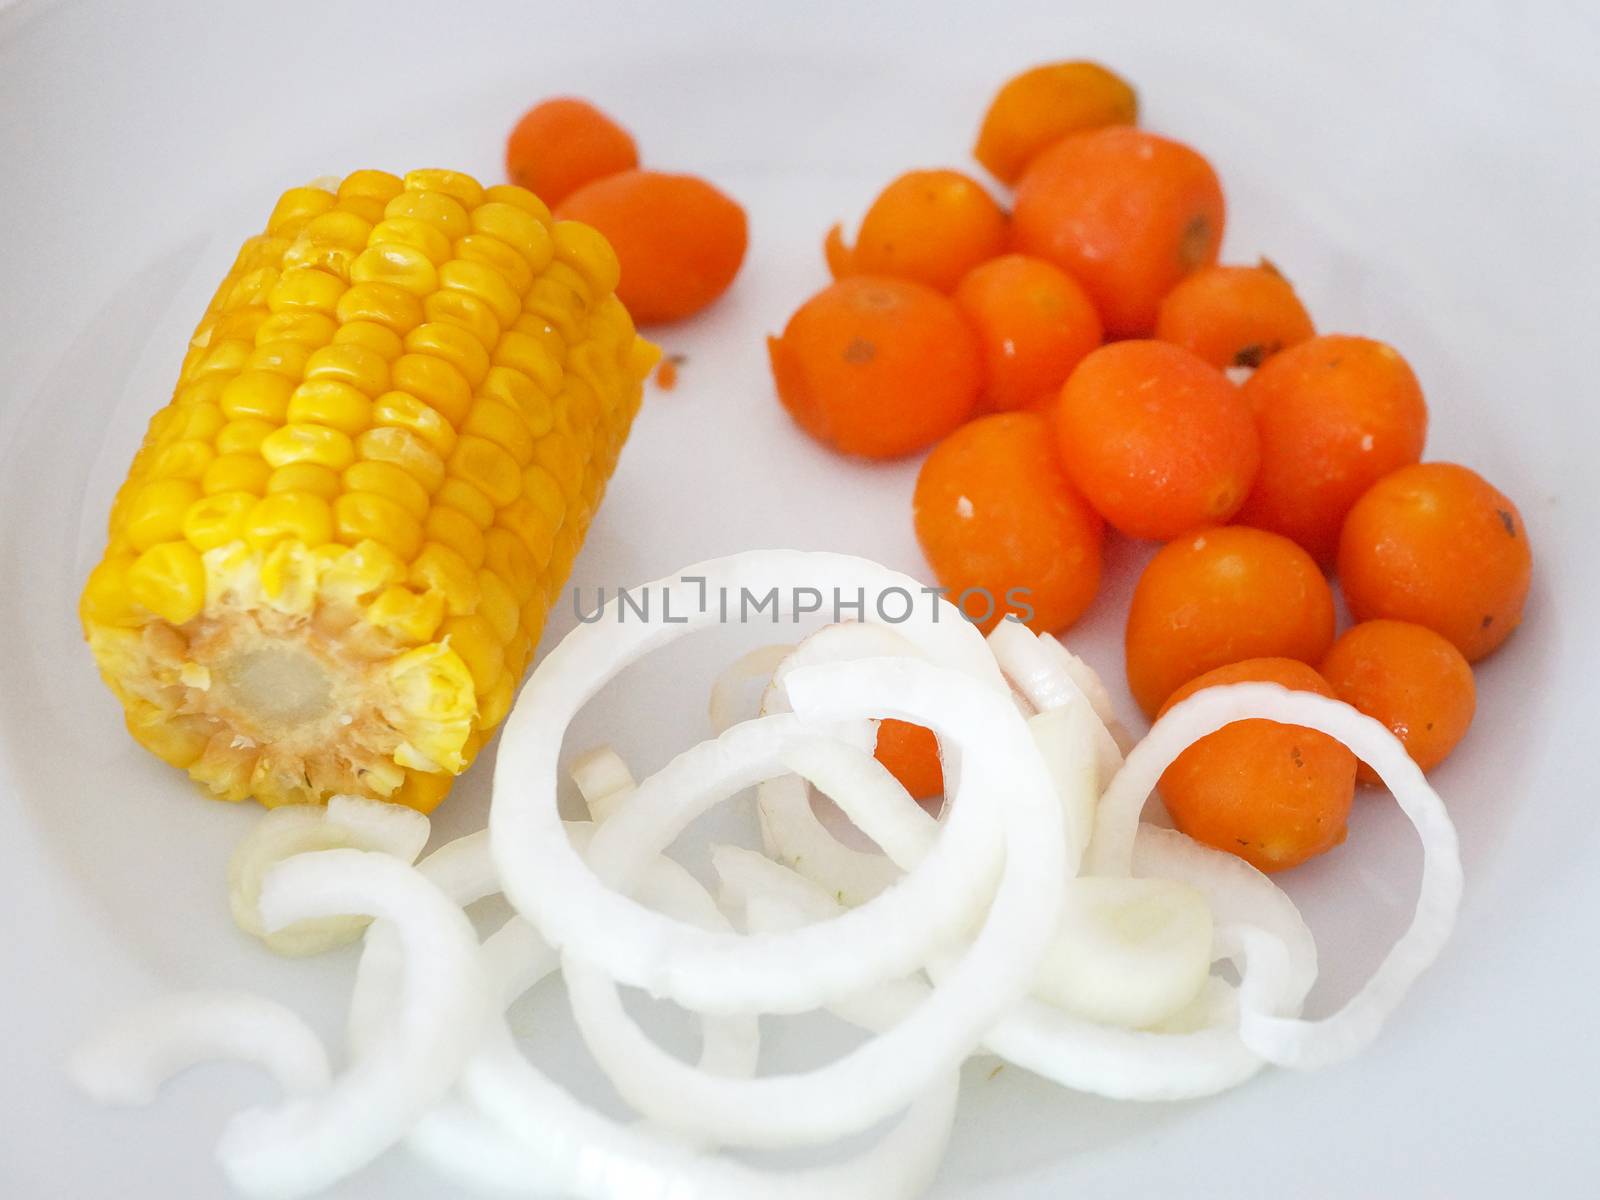 boiled corn, carrots and onions in rings on a white plate